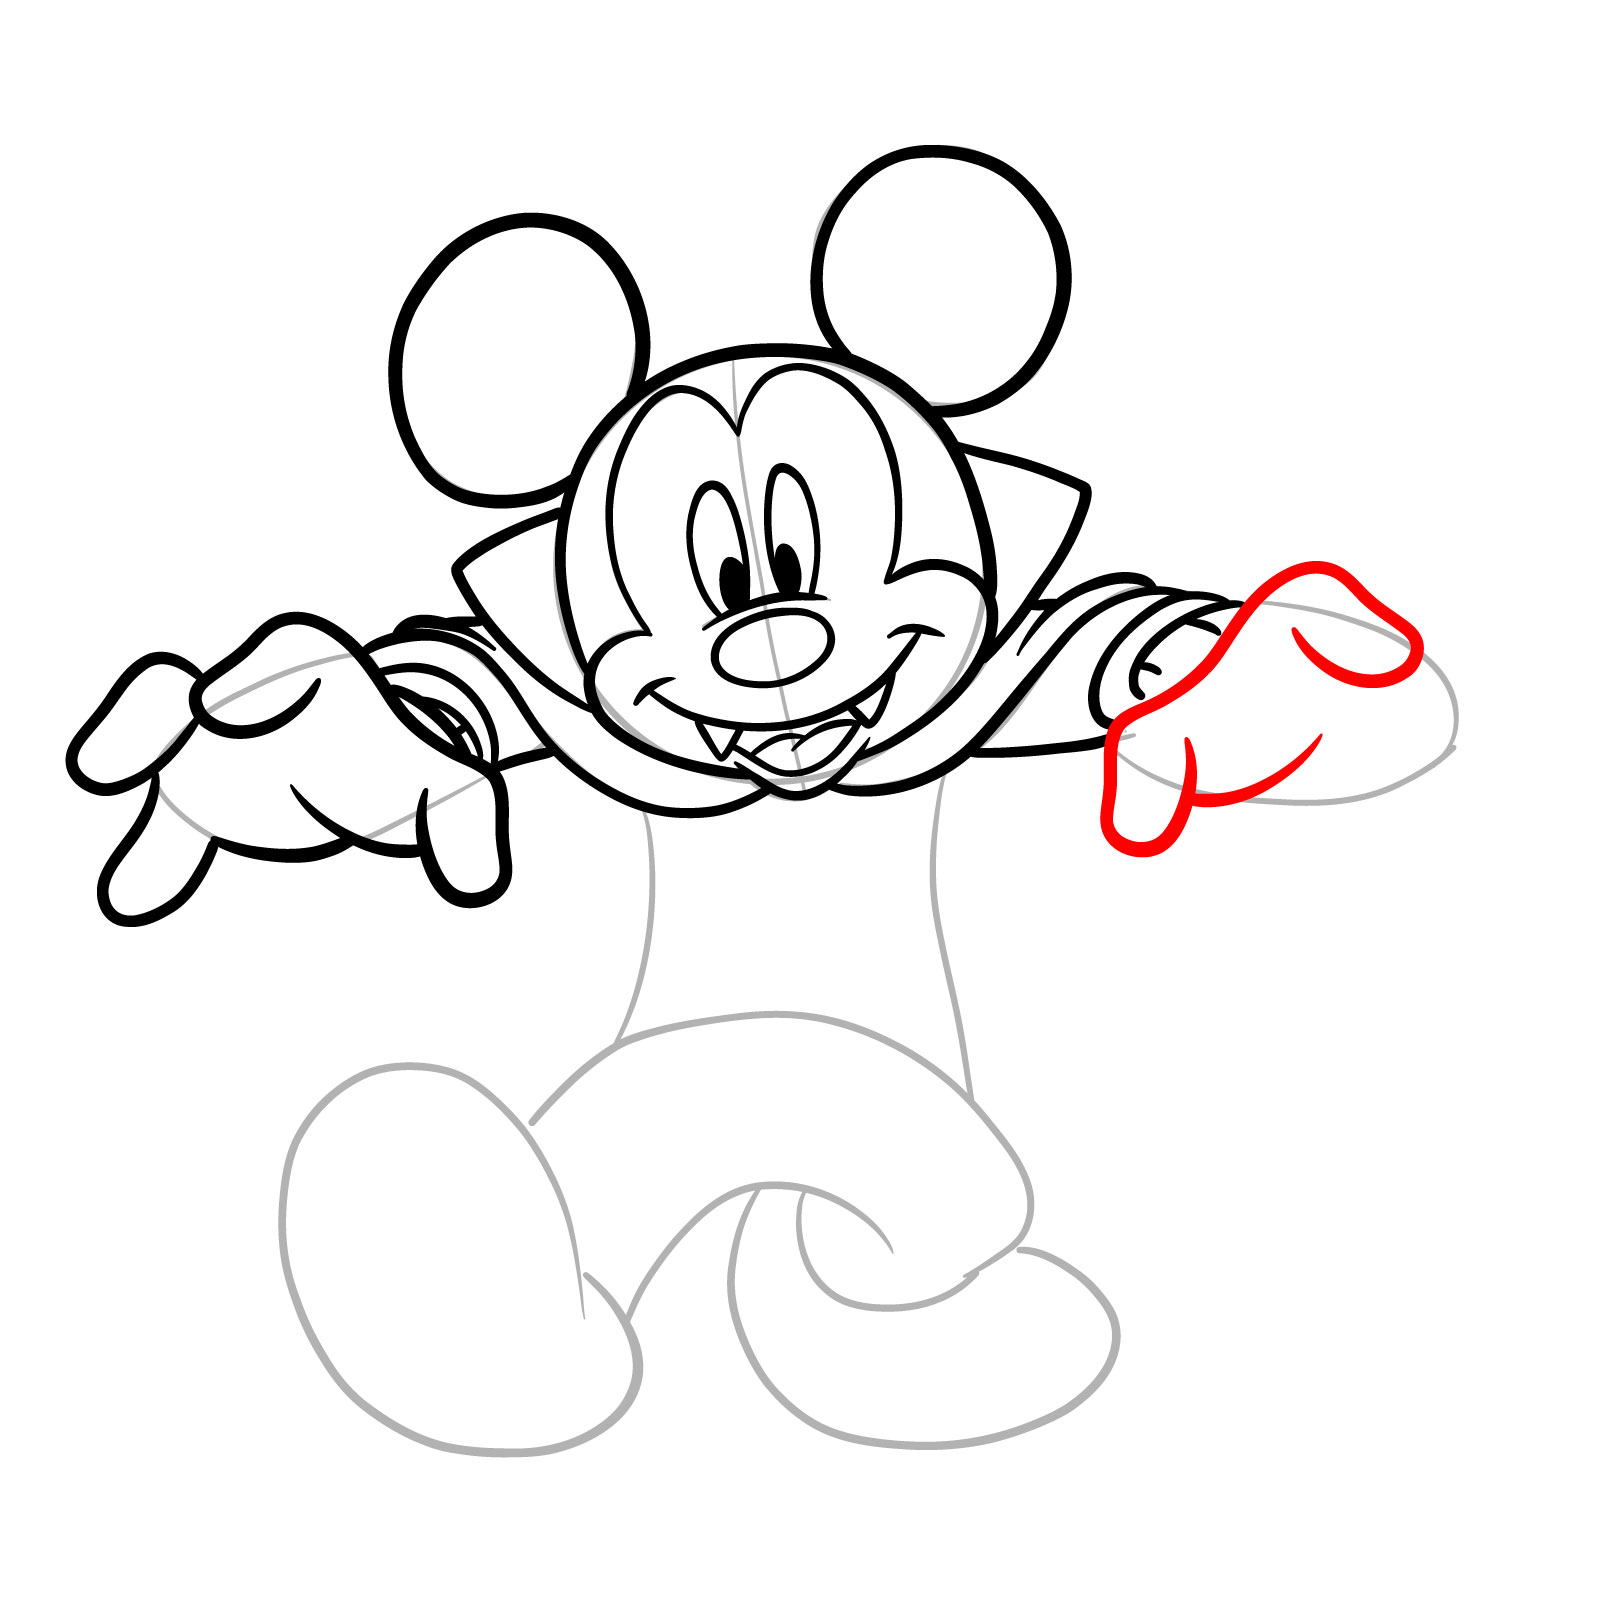 How to draw Dracula Mickey Mouse - step 17